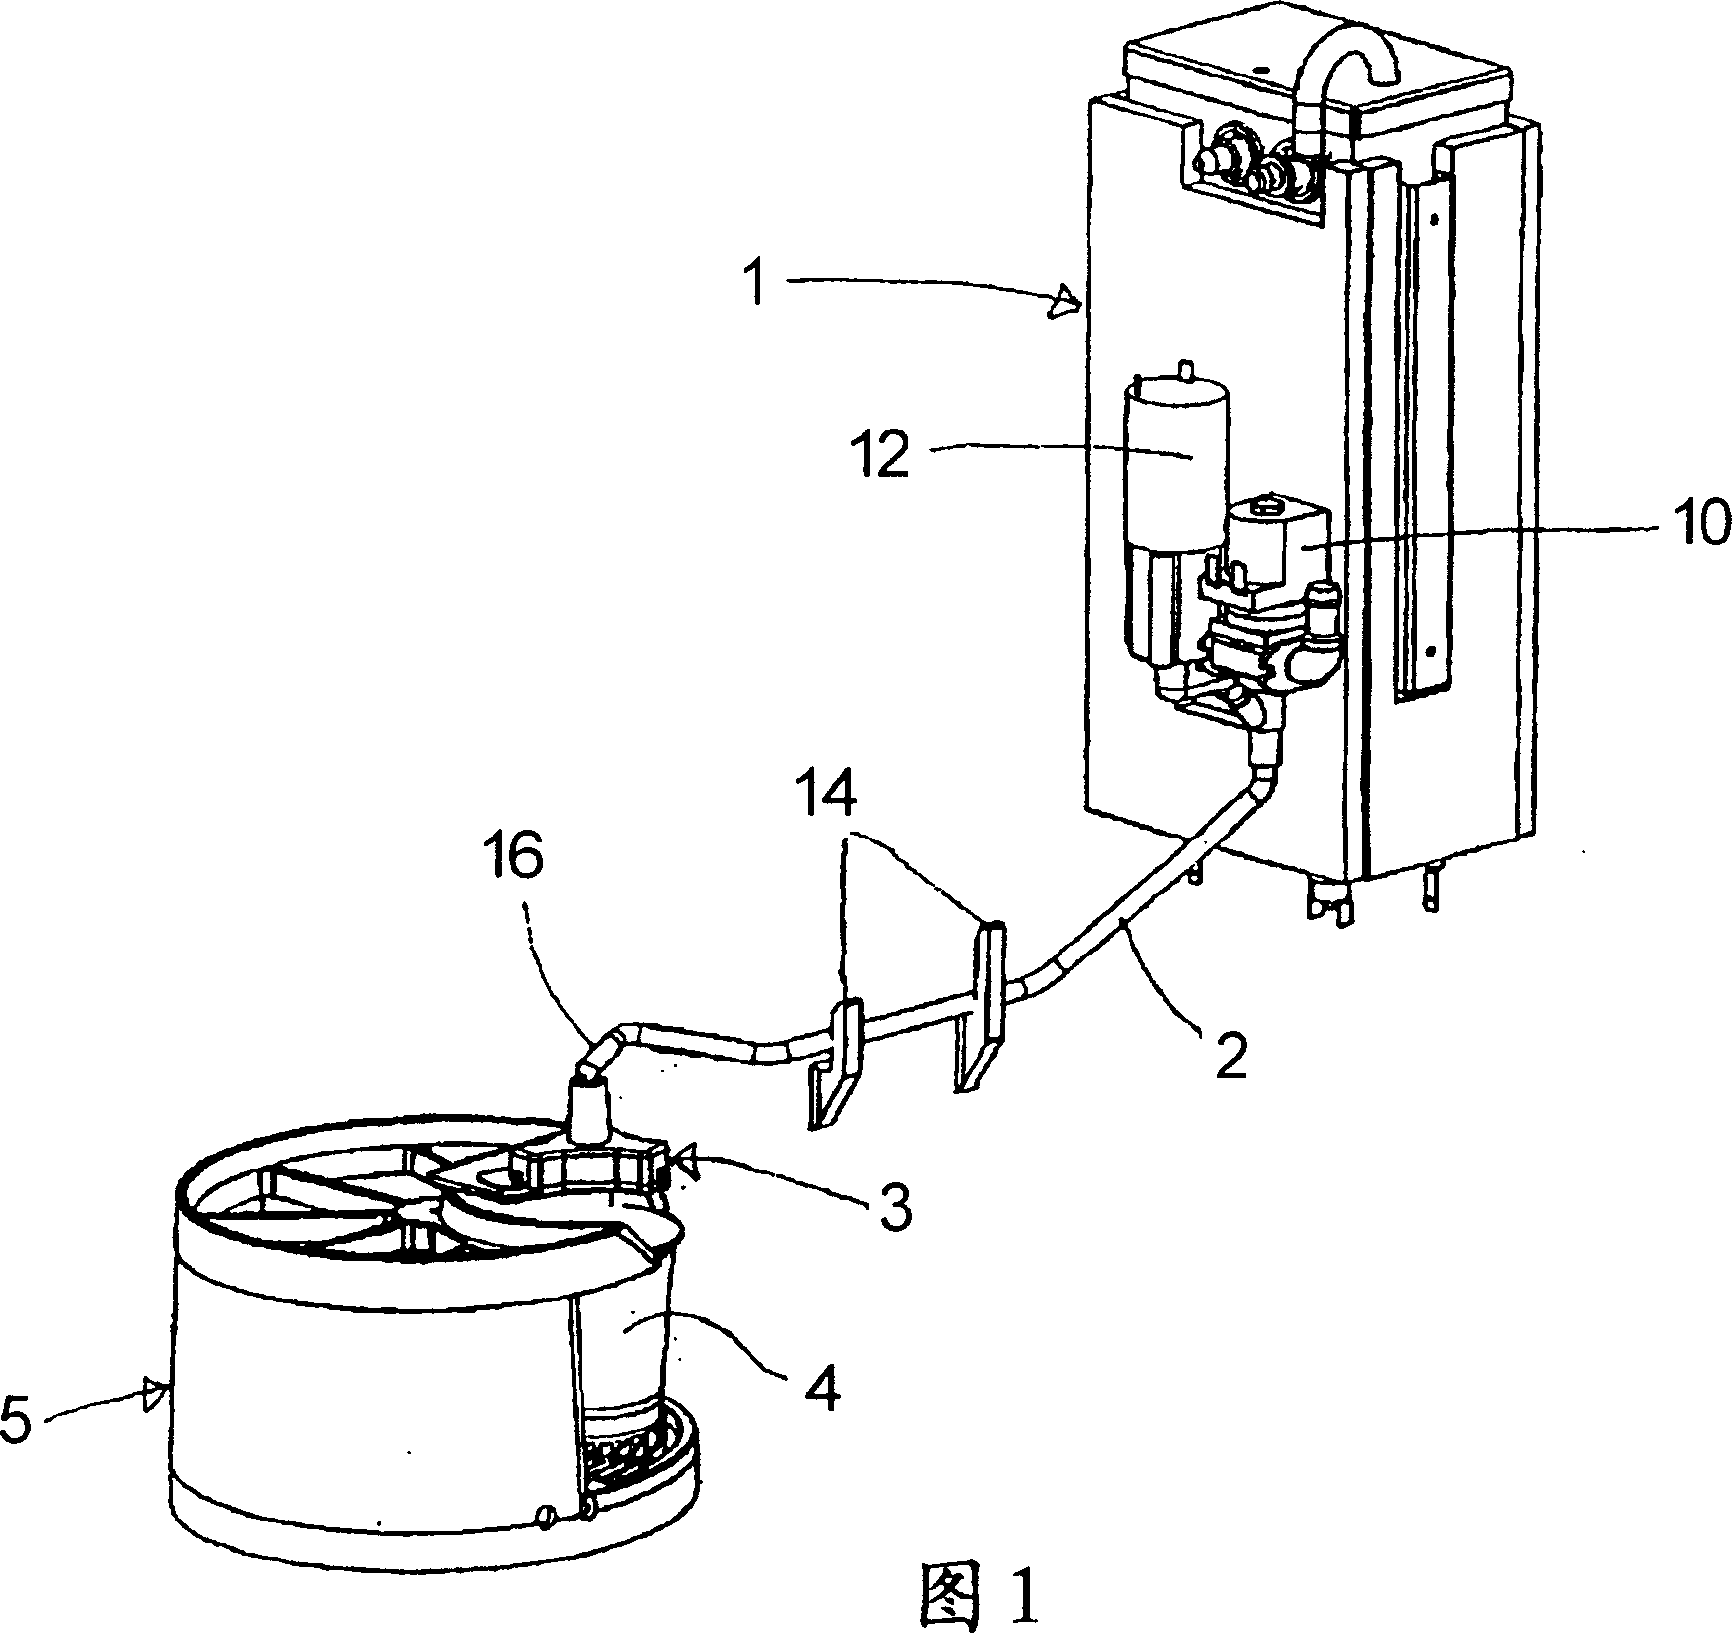 Apparatus and method for stirring and mixing of beverages